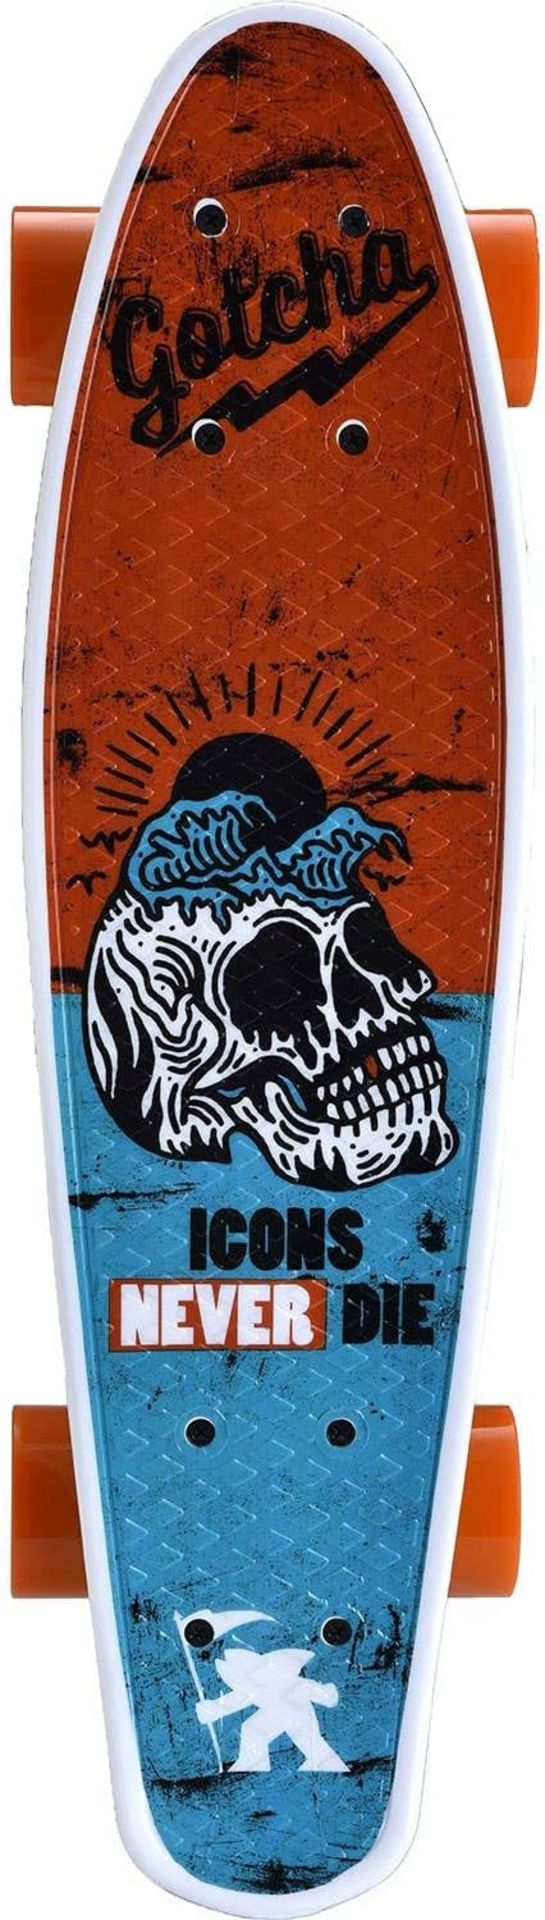 20 UNITS X NEW GOTCHA ICONS NEVER DIE COMPLETE CRUISER SKATEBOARD___**RRP £1200